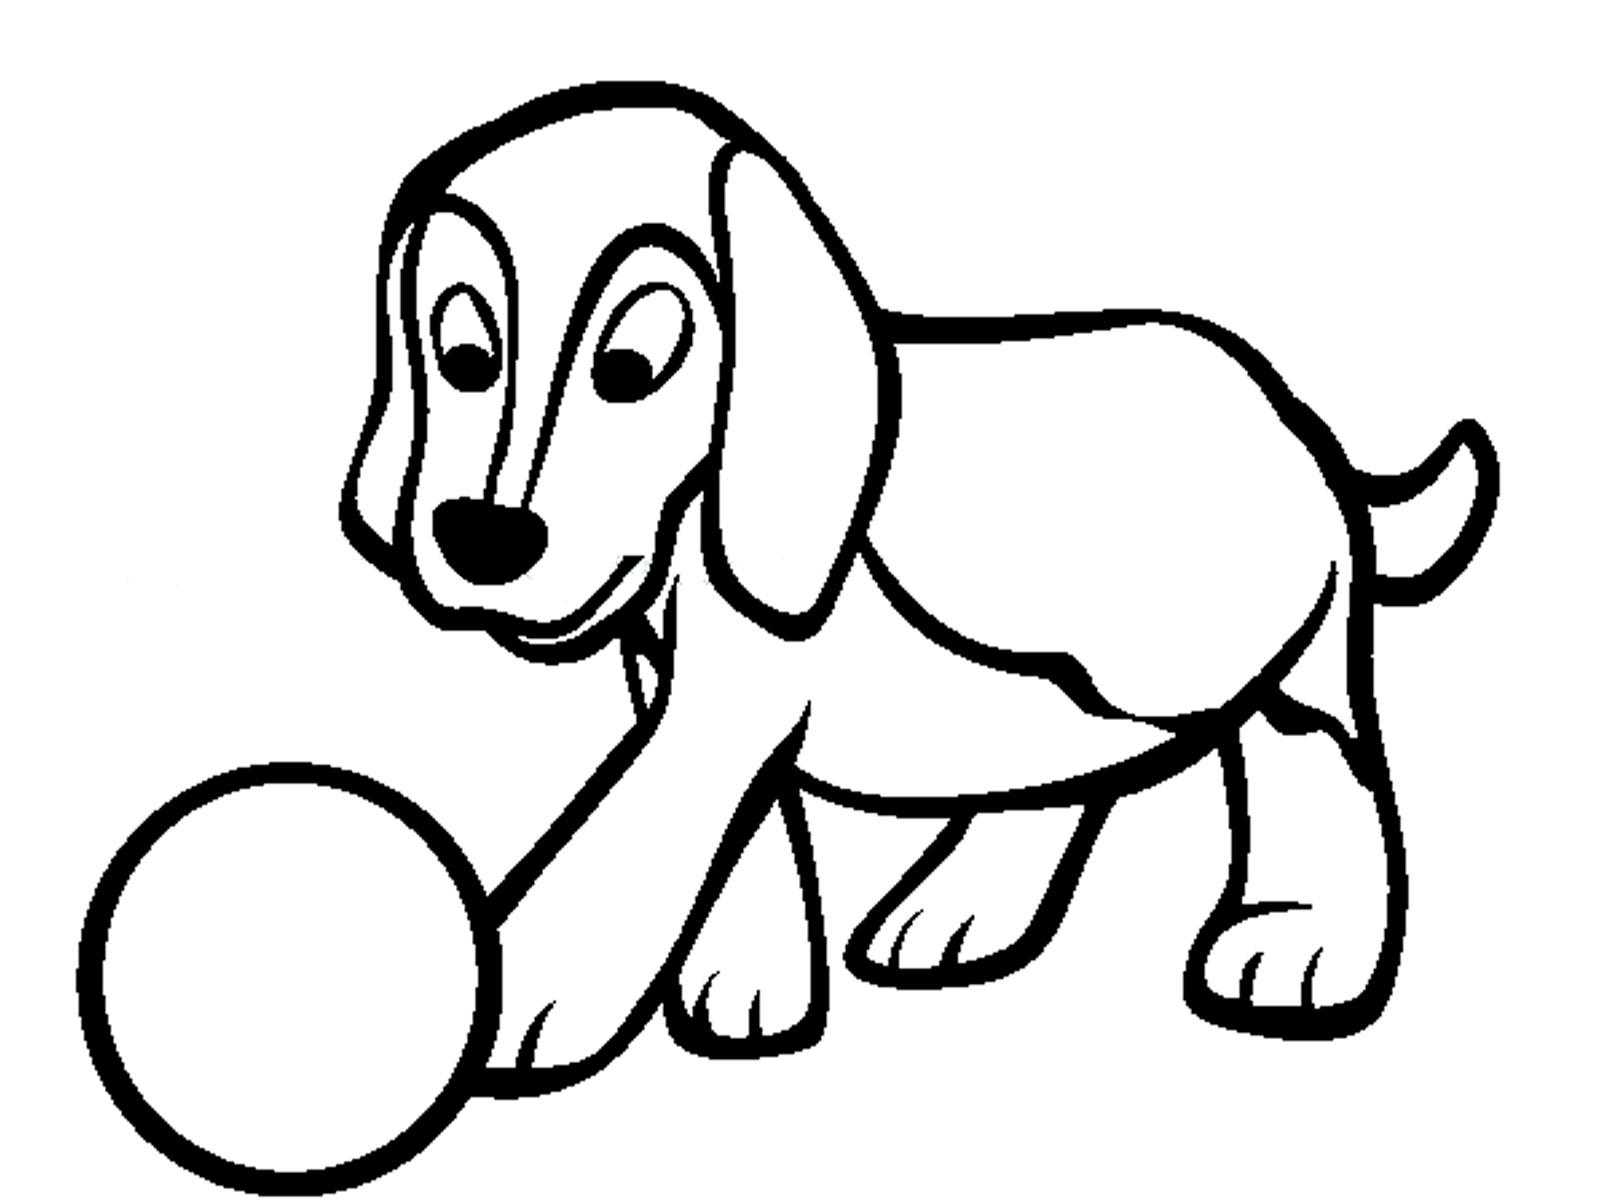 Coloring Puppy with ball. Category Pets allowed. Tags:  puppy, ball.